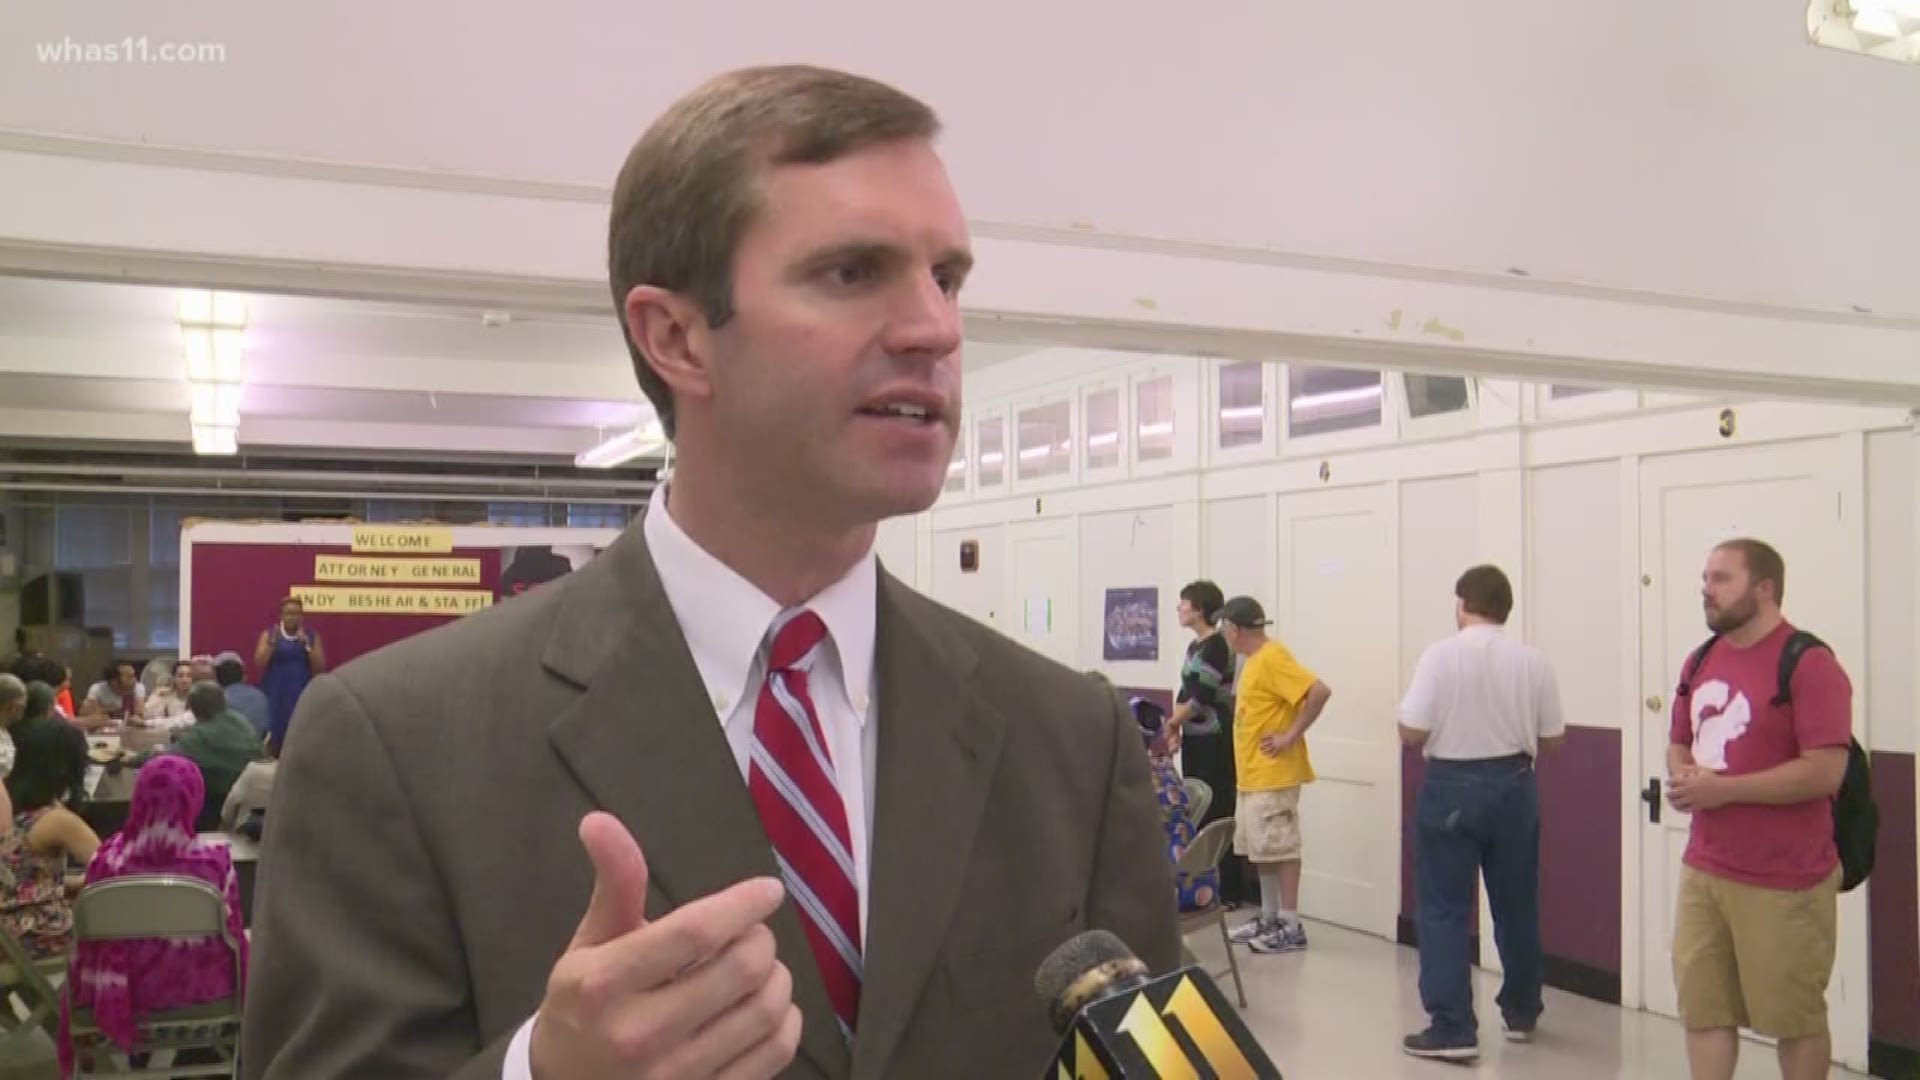 Multiple sources close to the attorney general Andy Beshear say he will announce his candidacy for Kentucky governor, challenging Matt Bevin.